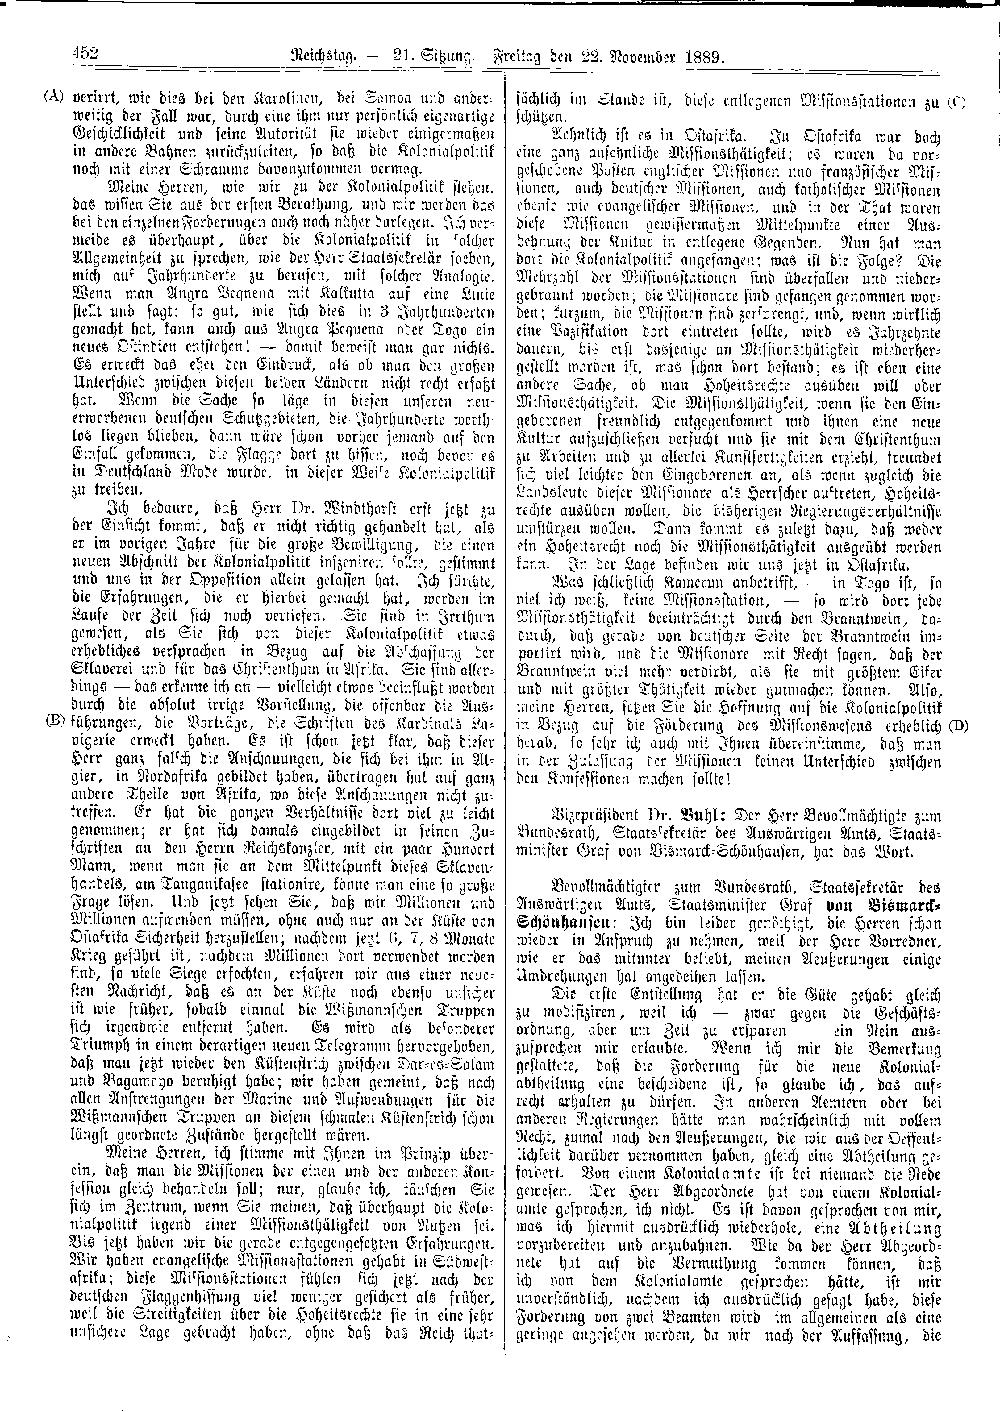 Scan of page 452